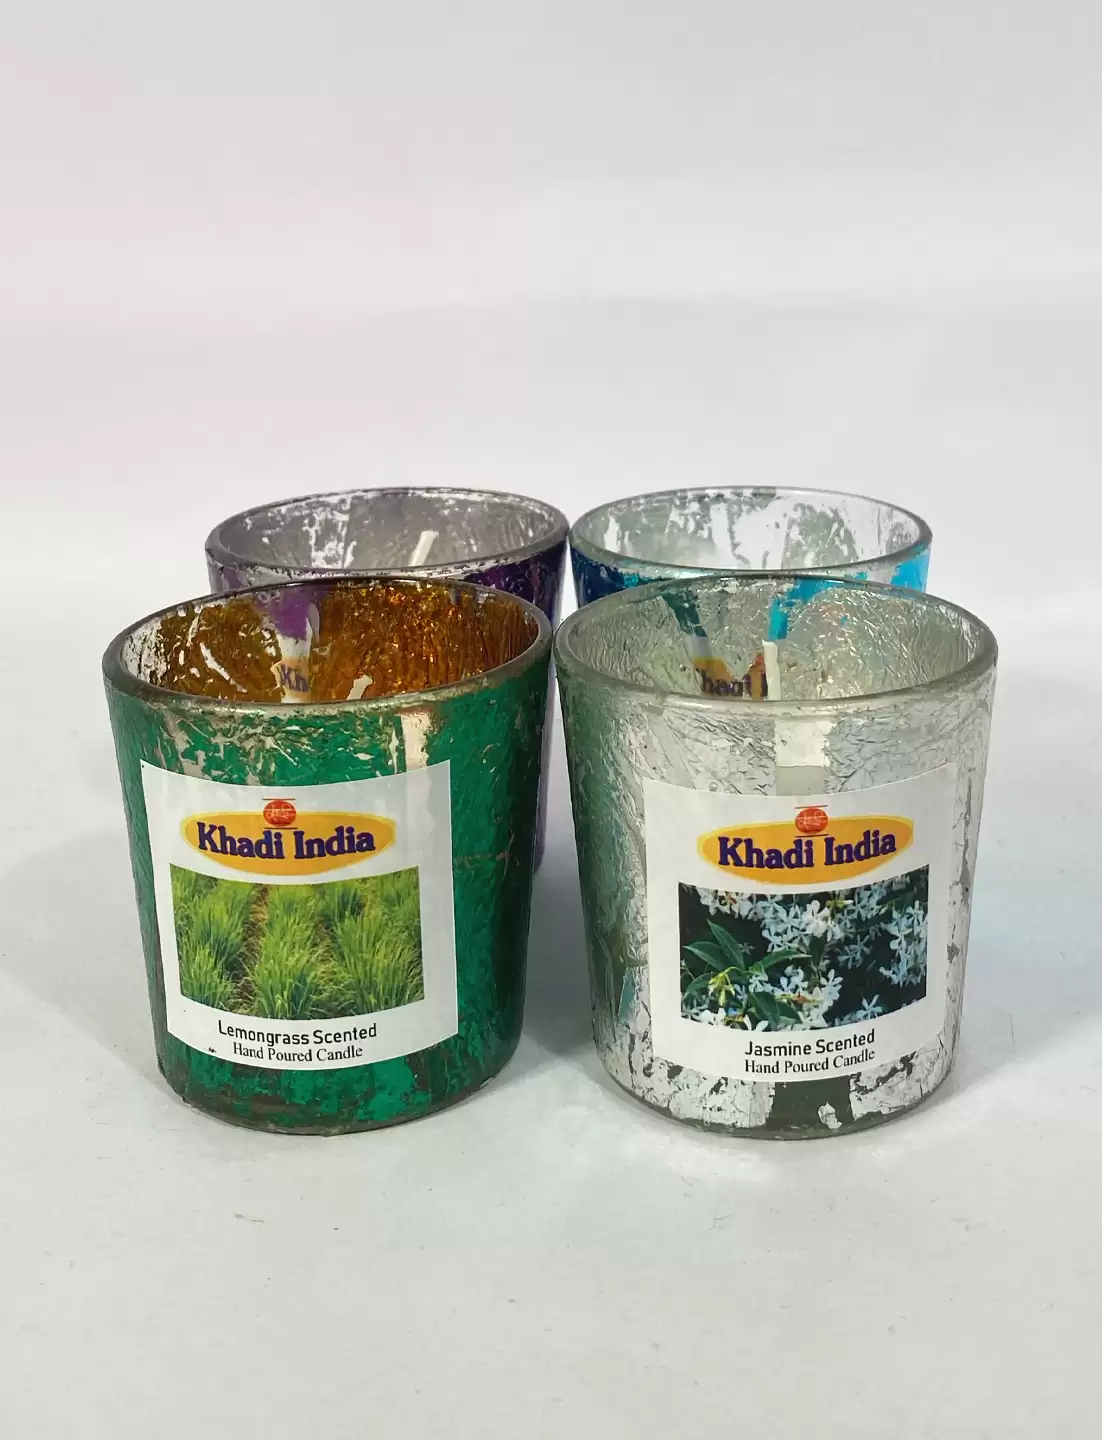 Khargadham 24 PSC Scented Gel Candle for Home/Office/Diwali All Kind of  Festival/Decoration Candle Price in India - Buy Khargadham 24 PSC Scented Gel  Candle for Home/Office/Diwali All Kind of Festival/Decoration Candle online